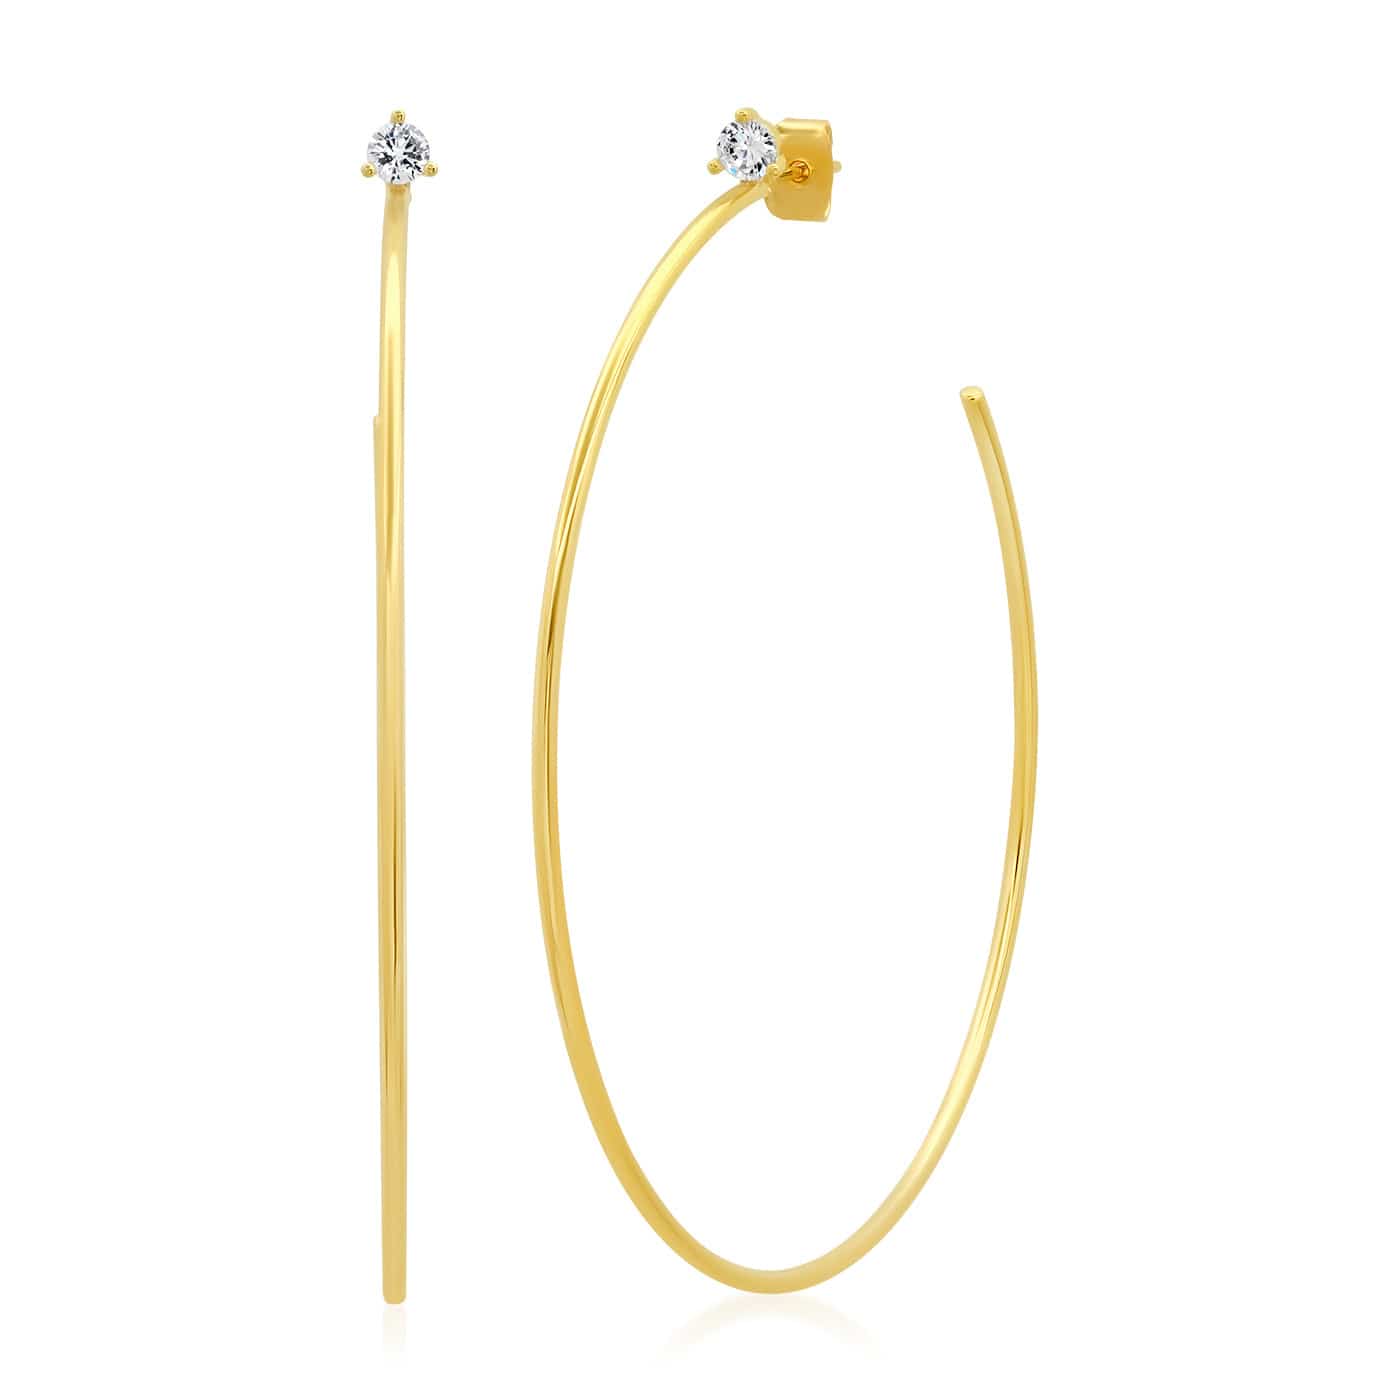 TAI JEWELRY Earrings Large Thin Gold Hoops With Cz Accent